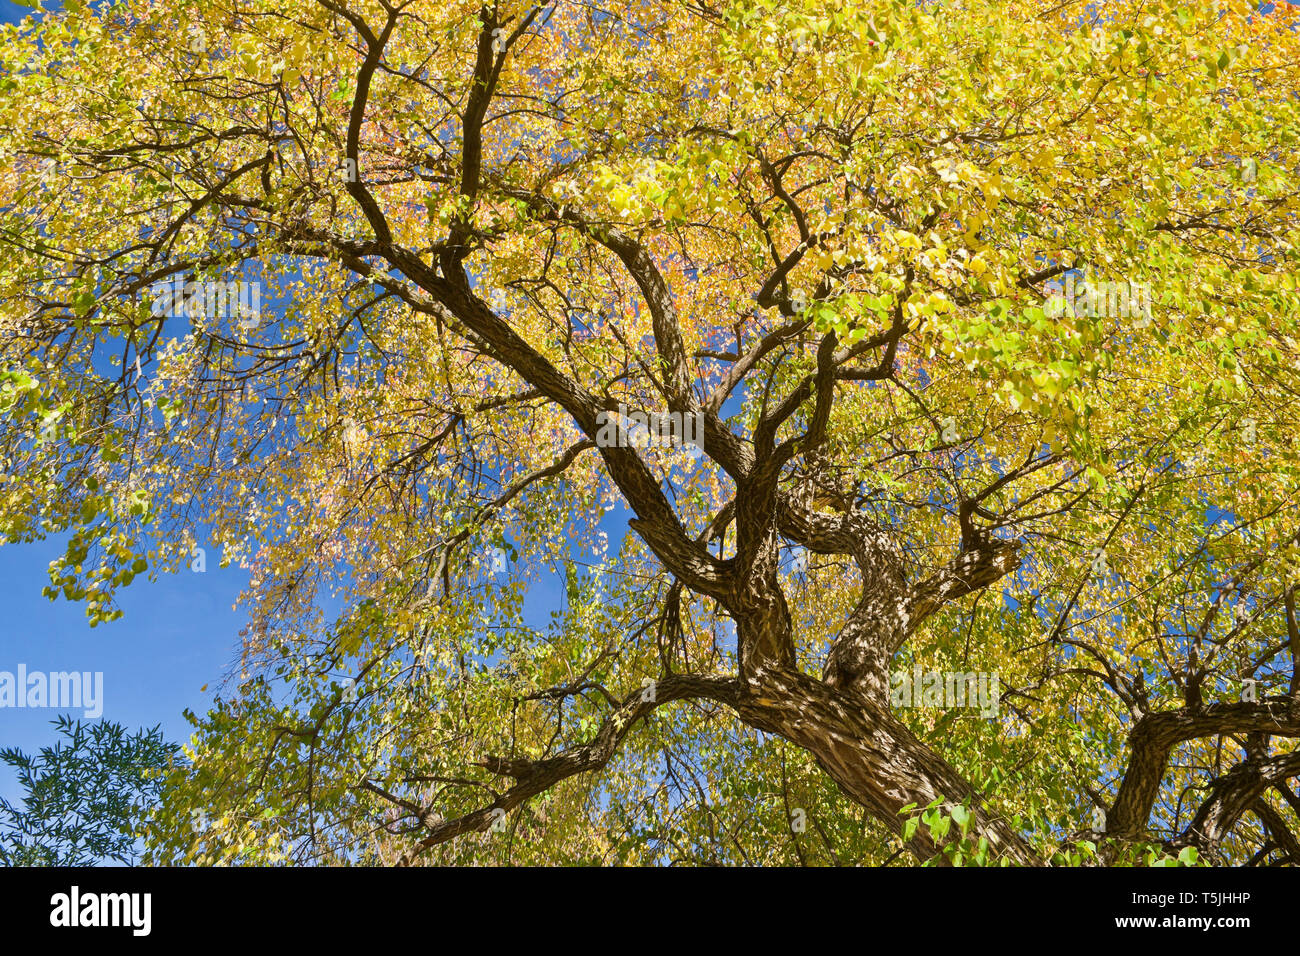 Looking up at a spindletree with delicate autumn foliage surrounding the branches. Stock Photo